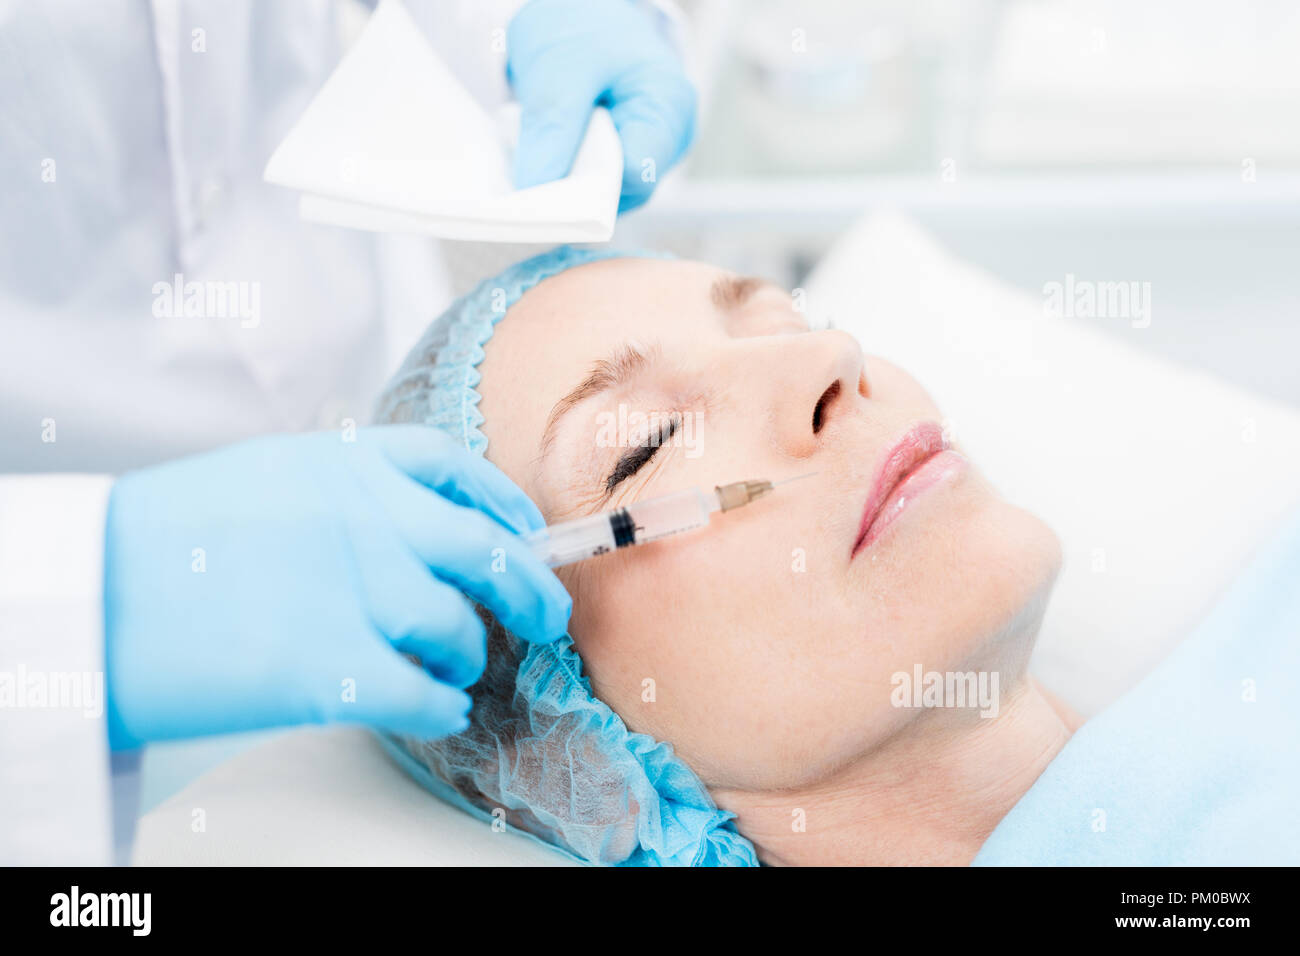 Cosmetician making rejuvenating injection between nose and upper lip of mature client Stock Photo